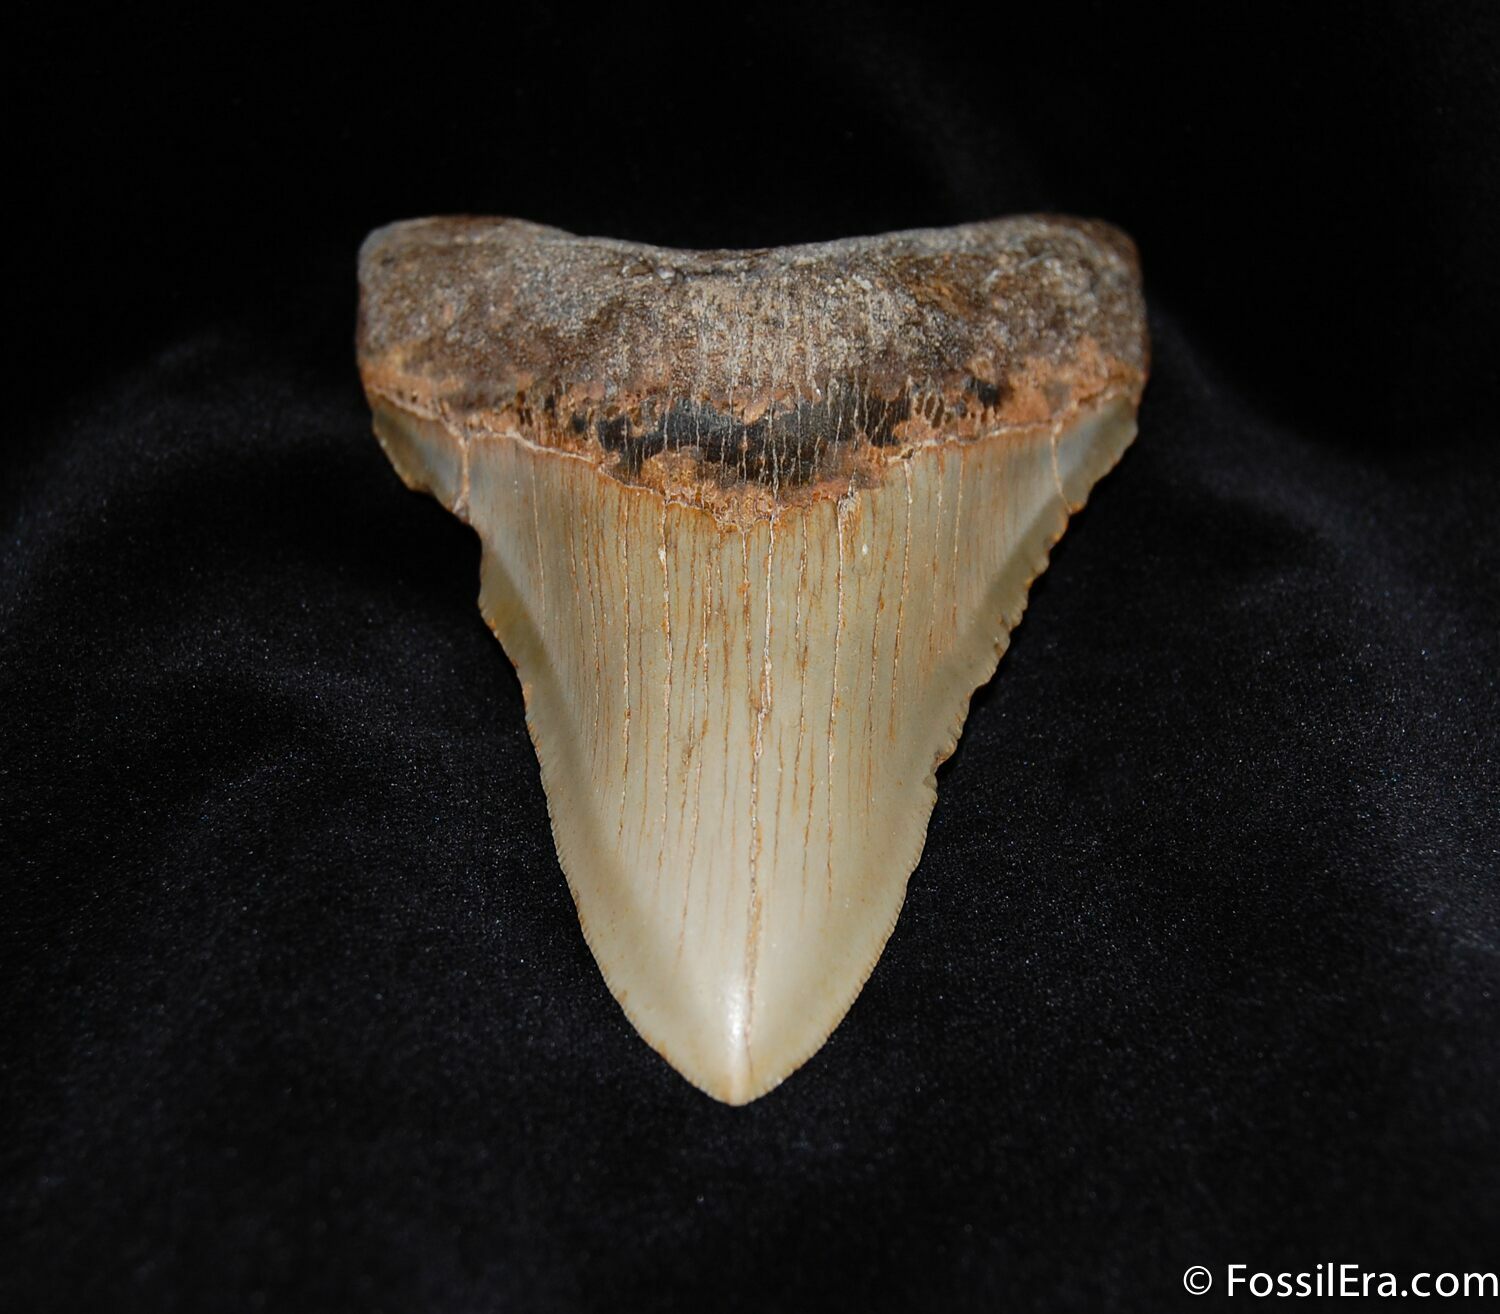 Big, Sharp 4.9 Inch Megalodon Tooth For Sale (#58) - FossilEra.com